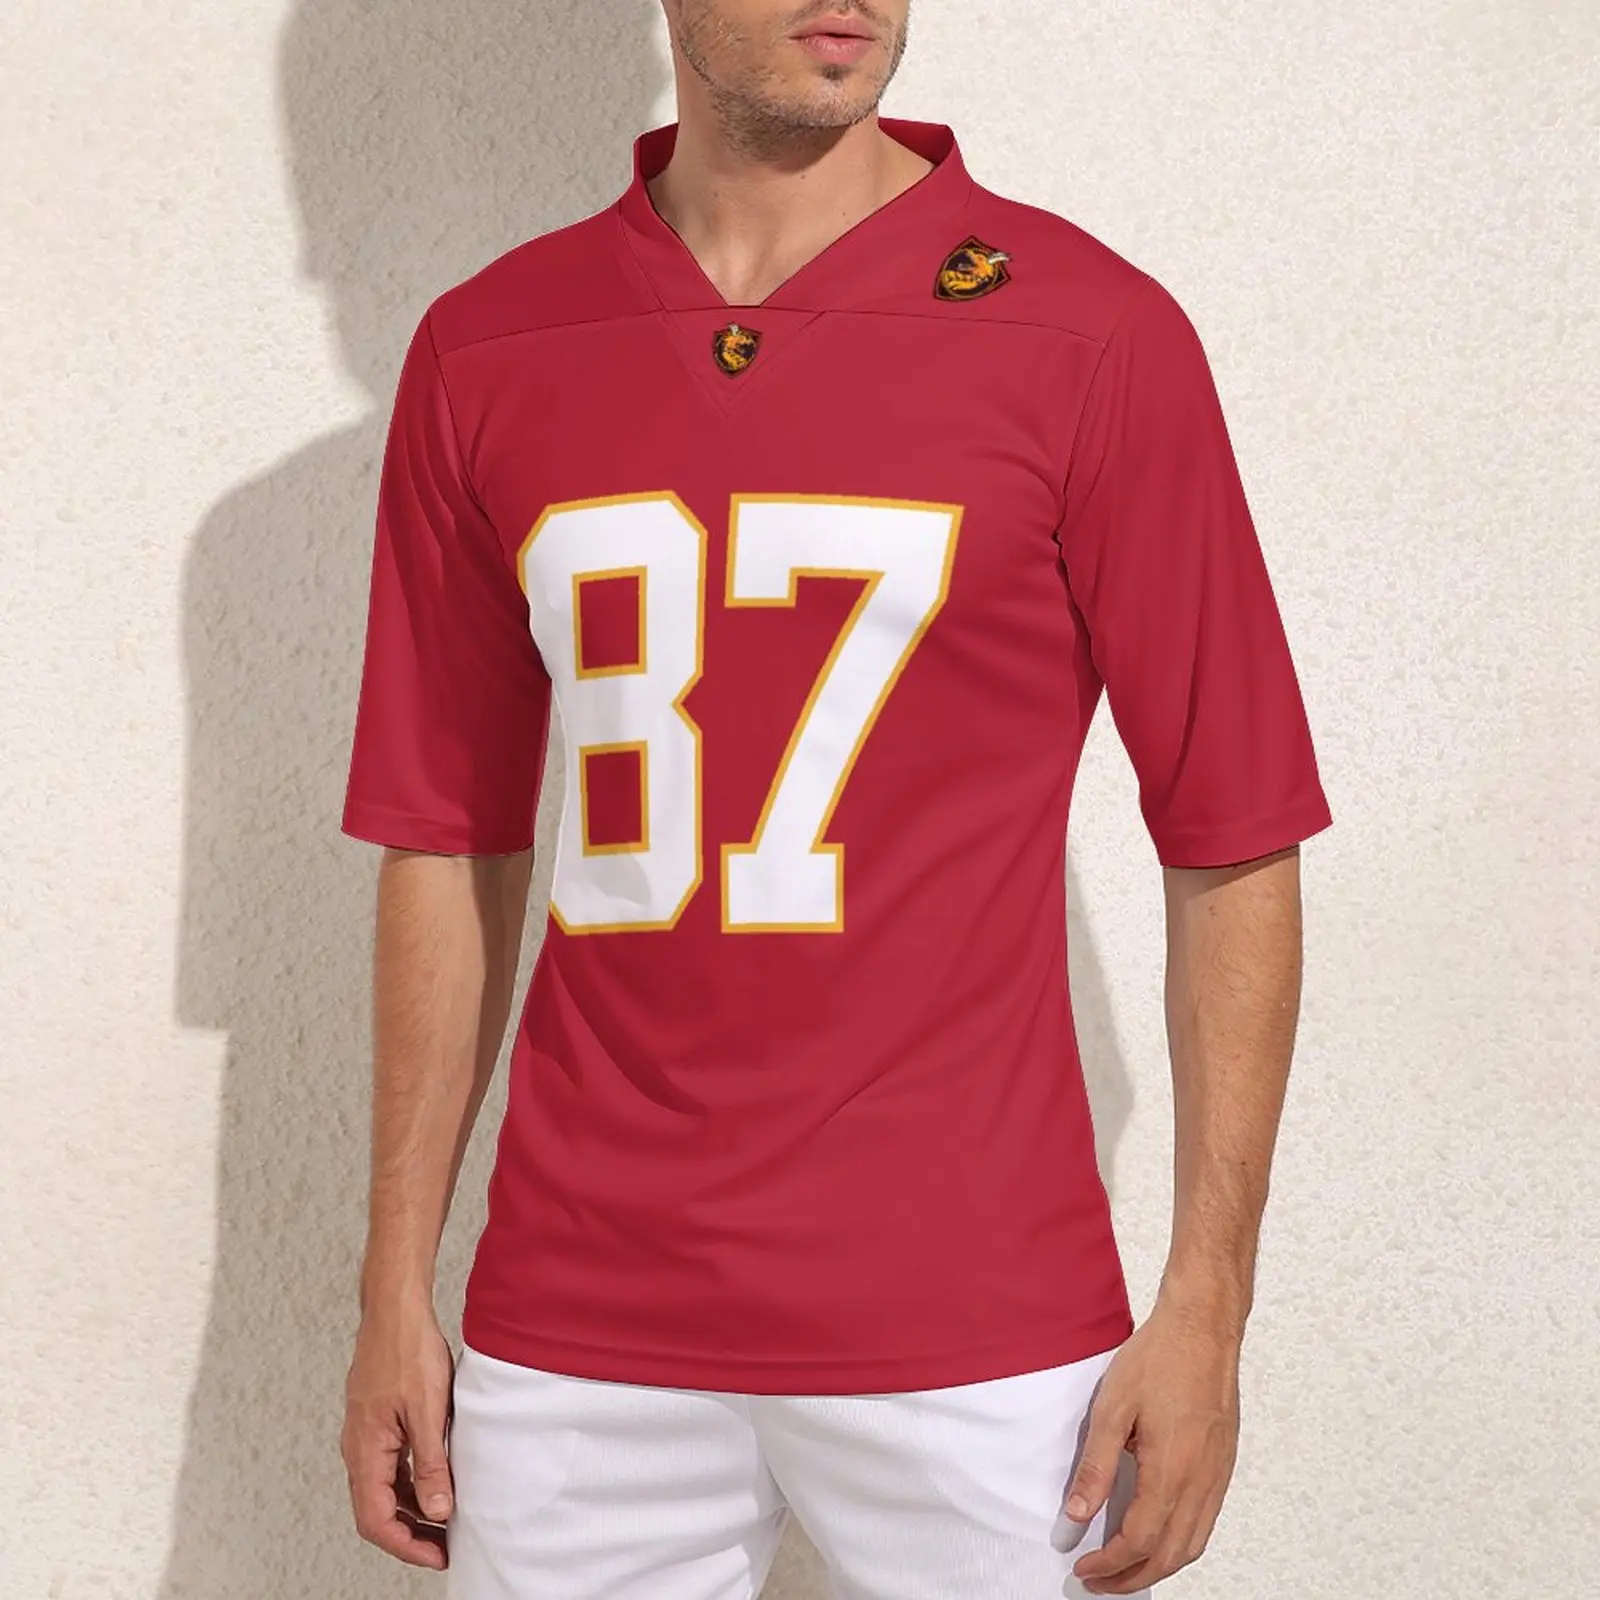 

Your Design Kansas City No 87 Red Football Jerseys For Men Vintage Rugby Jersey Team Customize Training Football Shirt